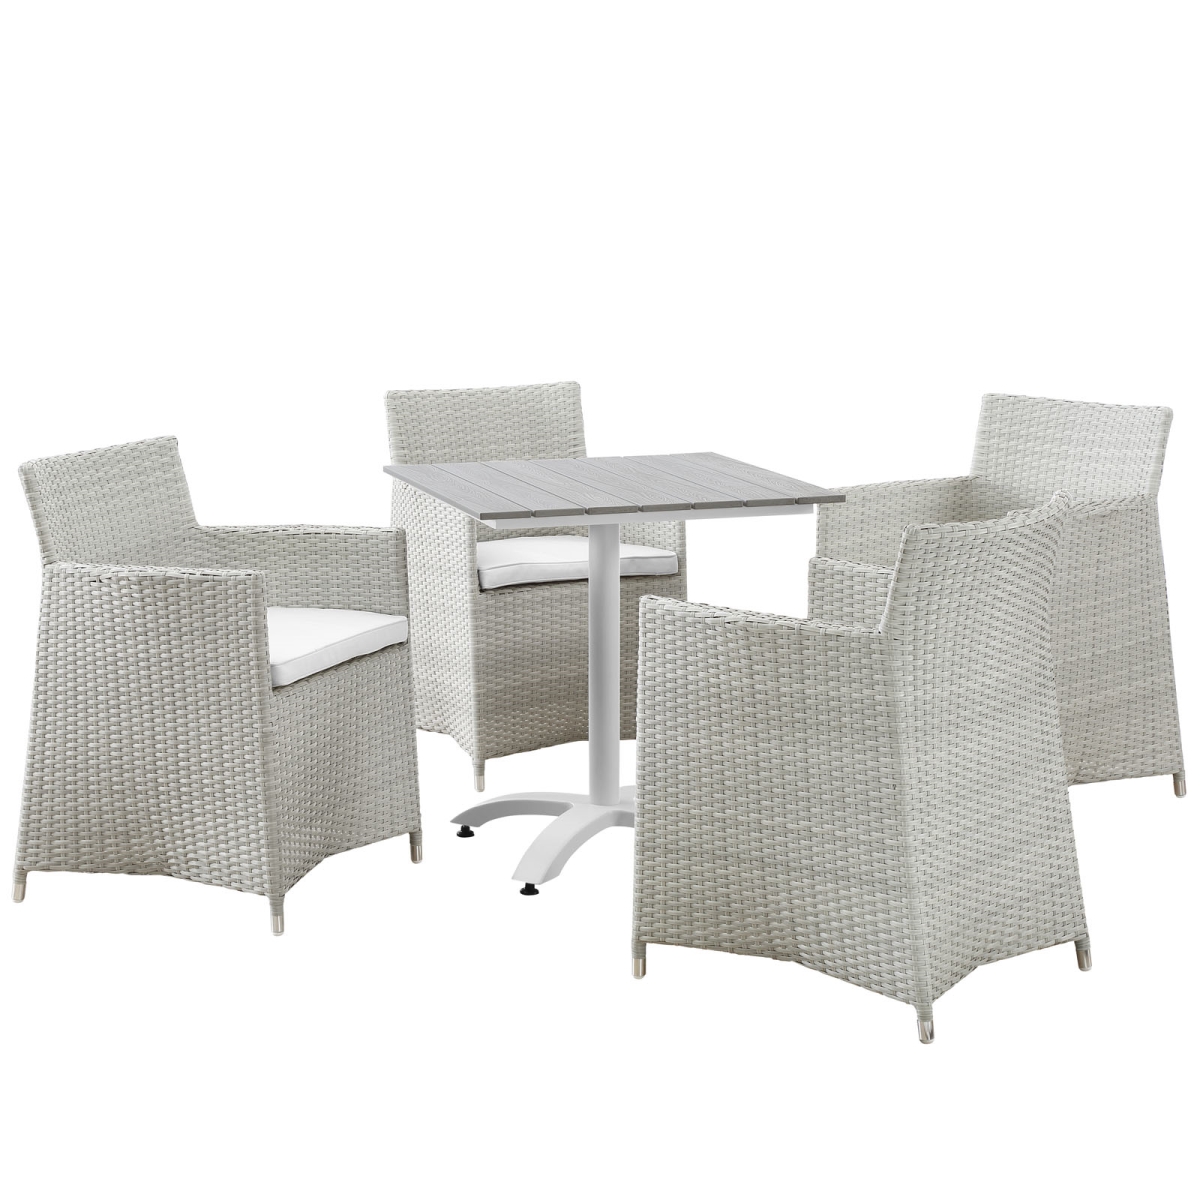 Eastend Eei-1760-gry-whi-set 5 Piece Junction Outdoor Patio Dining Set, White Poly Rattan